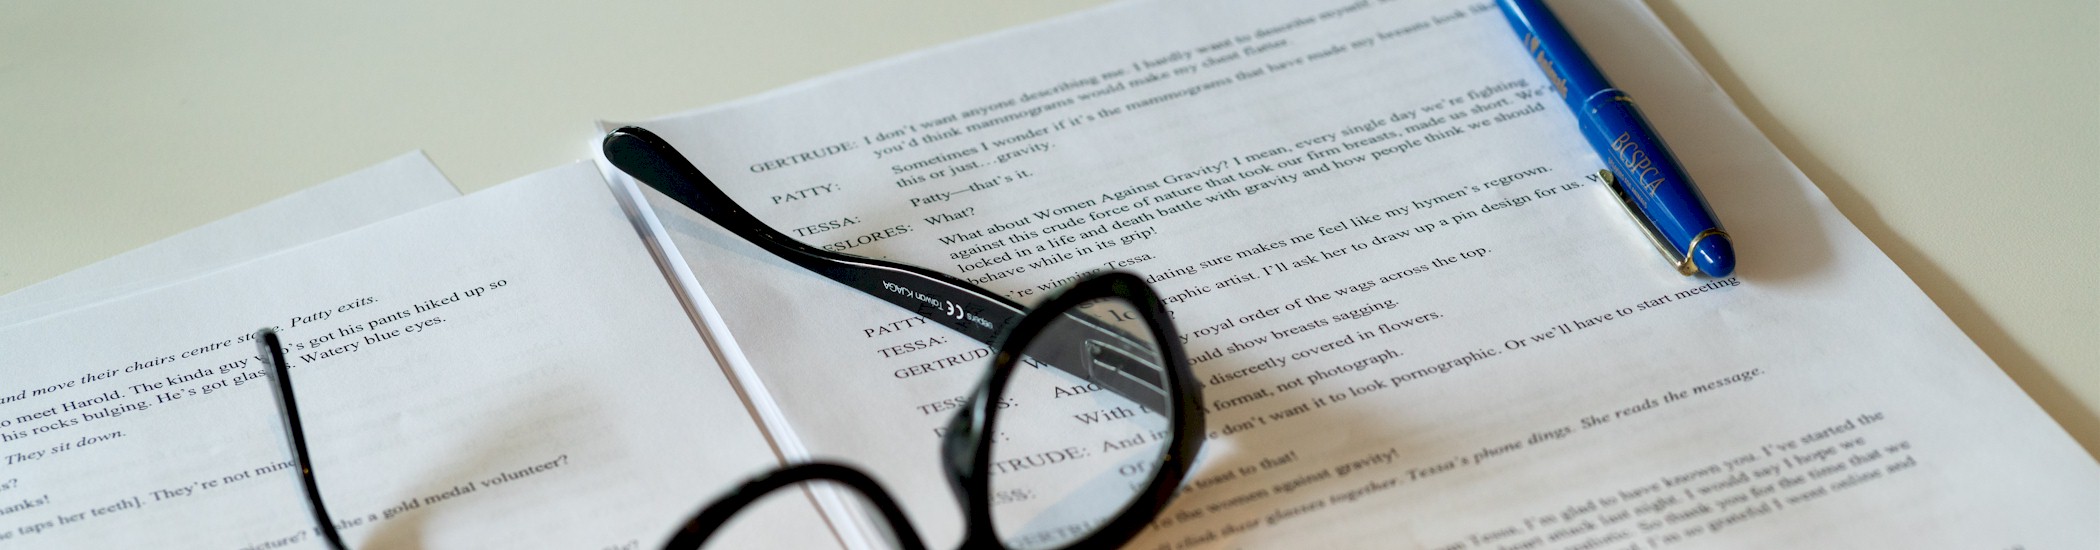 Close-up photo of an open script with a blue pen and black reading glasses sitting on top.